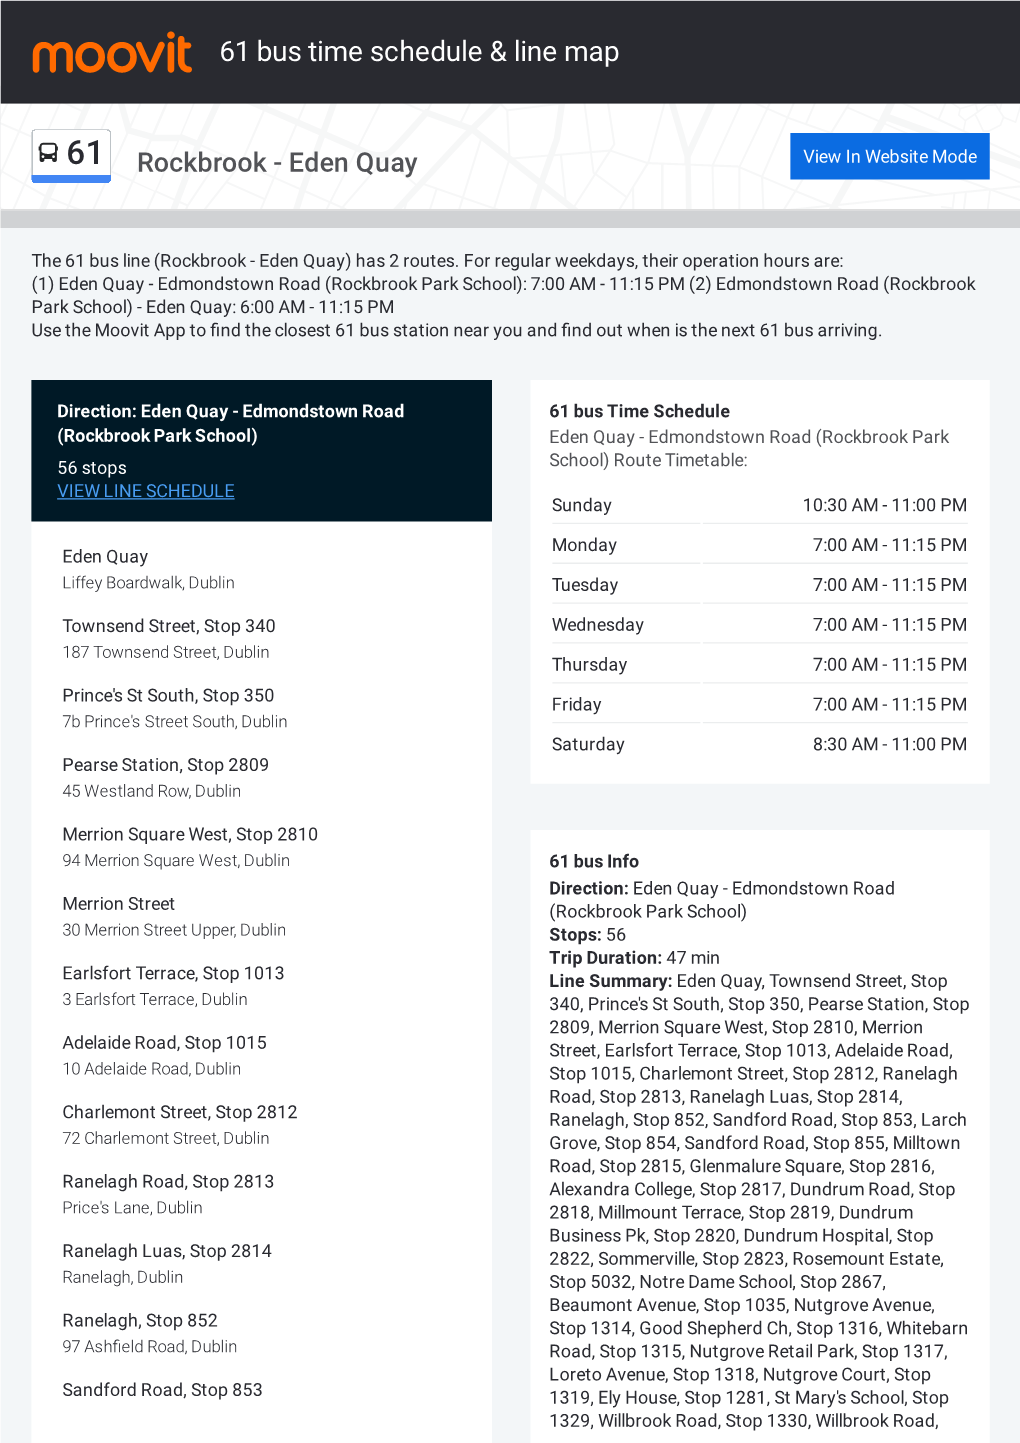 61 Bus Time Schedule & Line Route